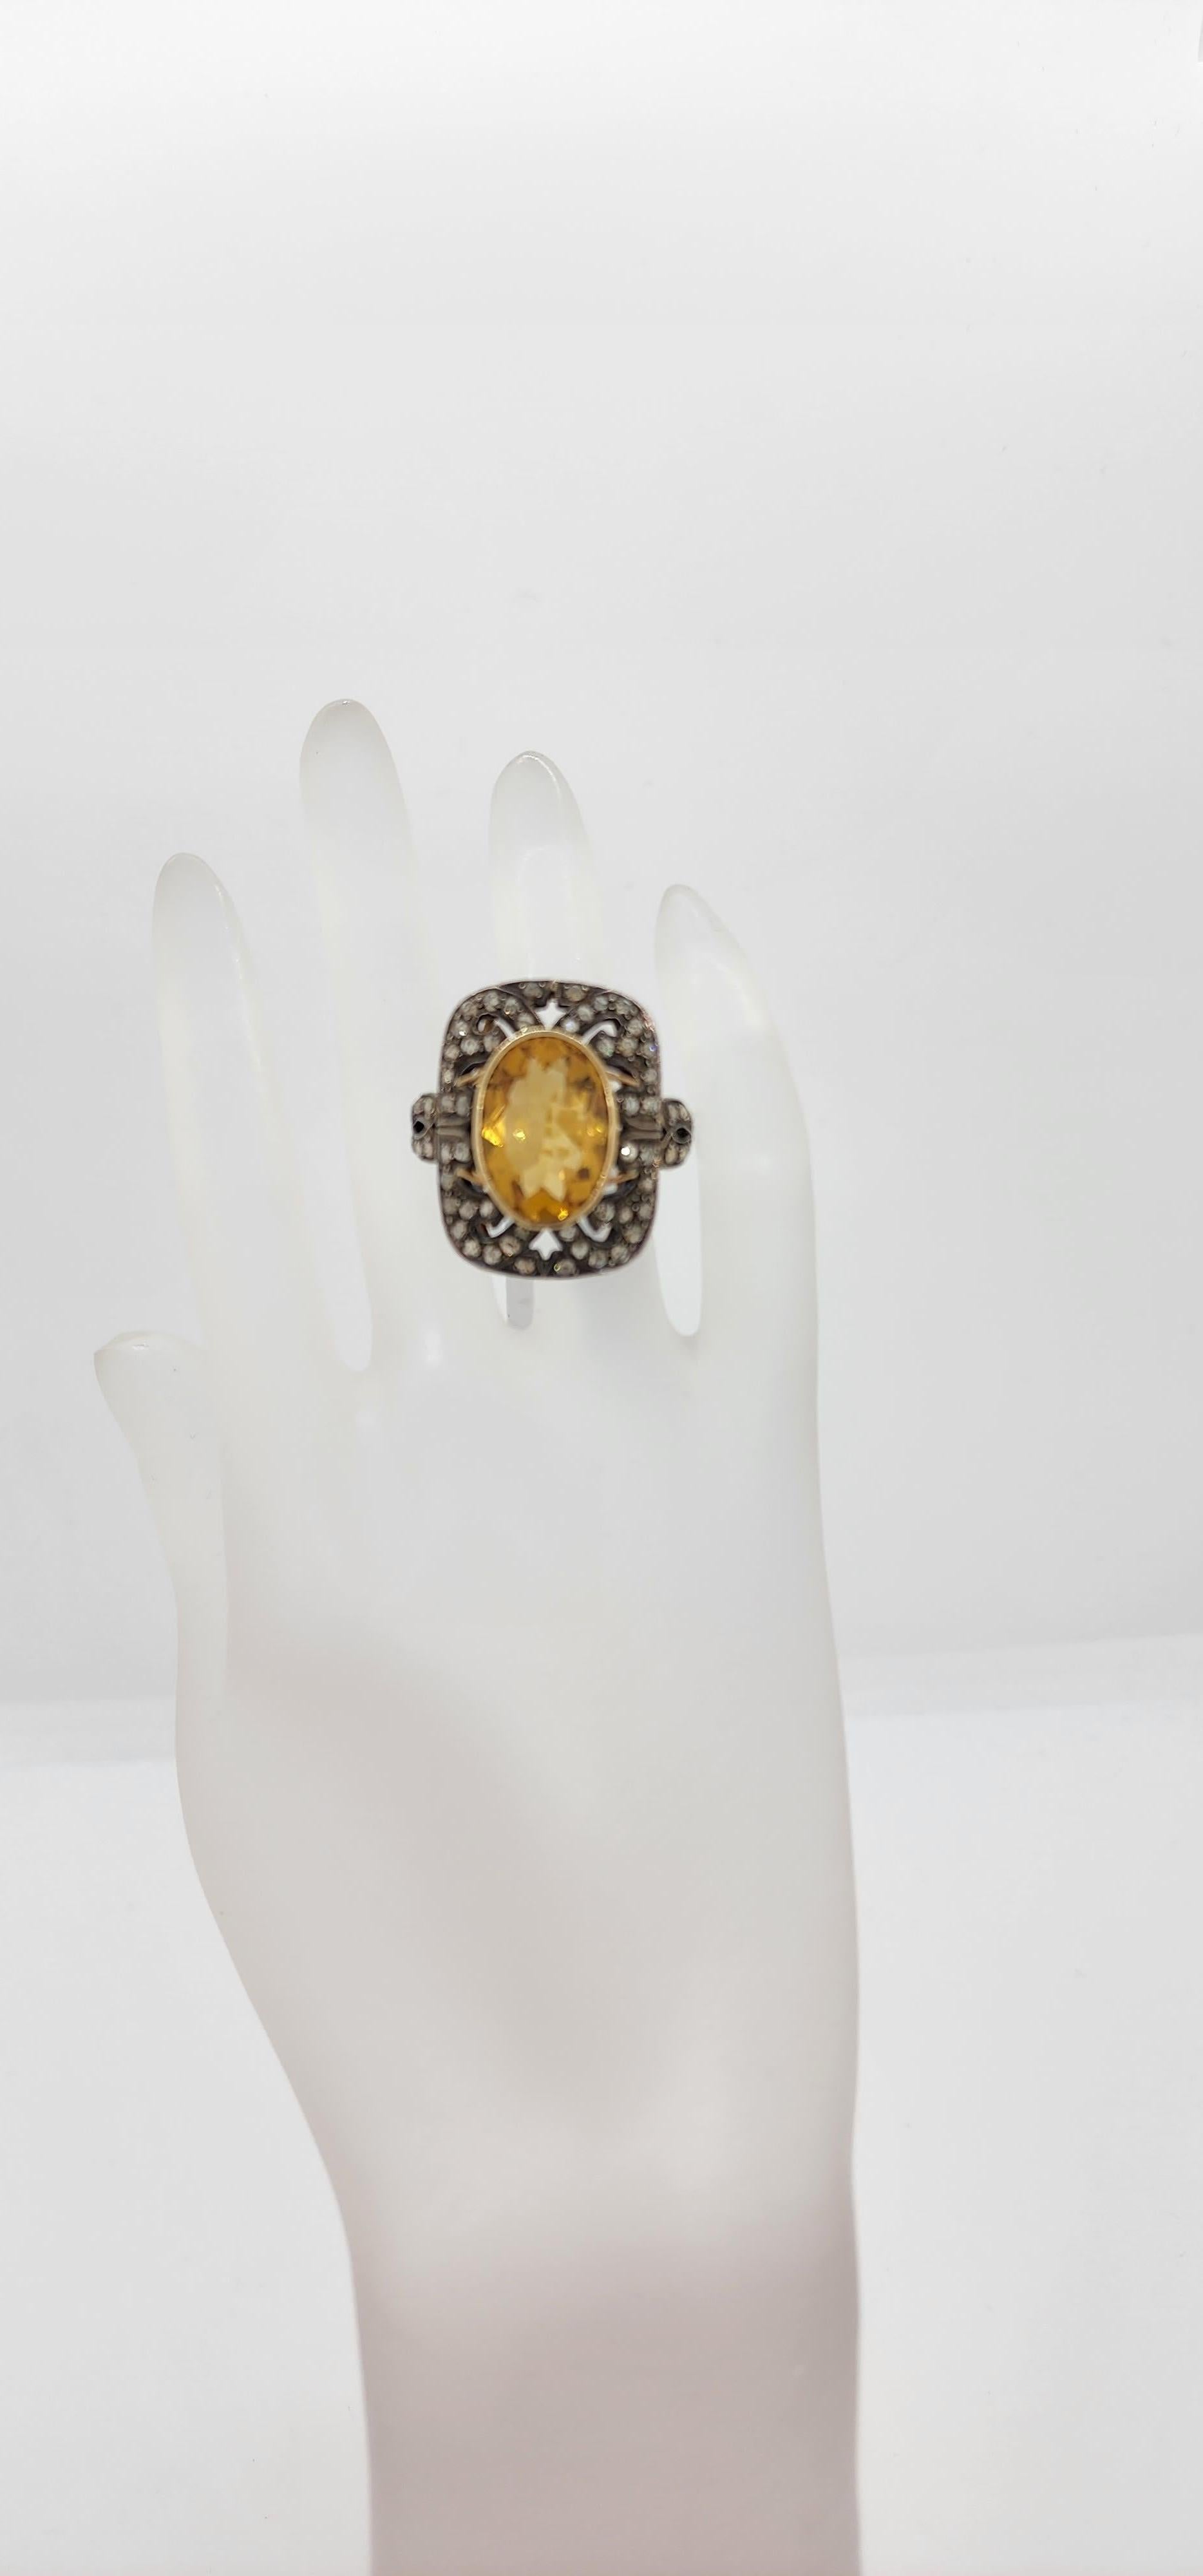  Citrine and Diamond Rose Cut Cocktail Ring in 14k and Black Rhodium For Sale 1